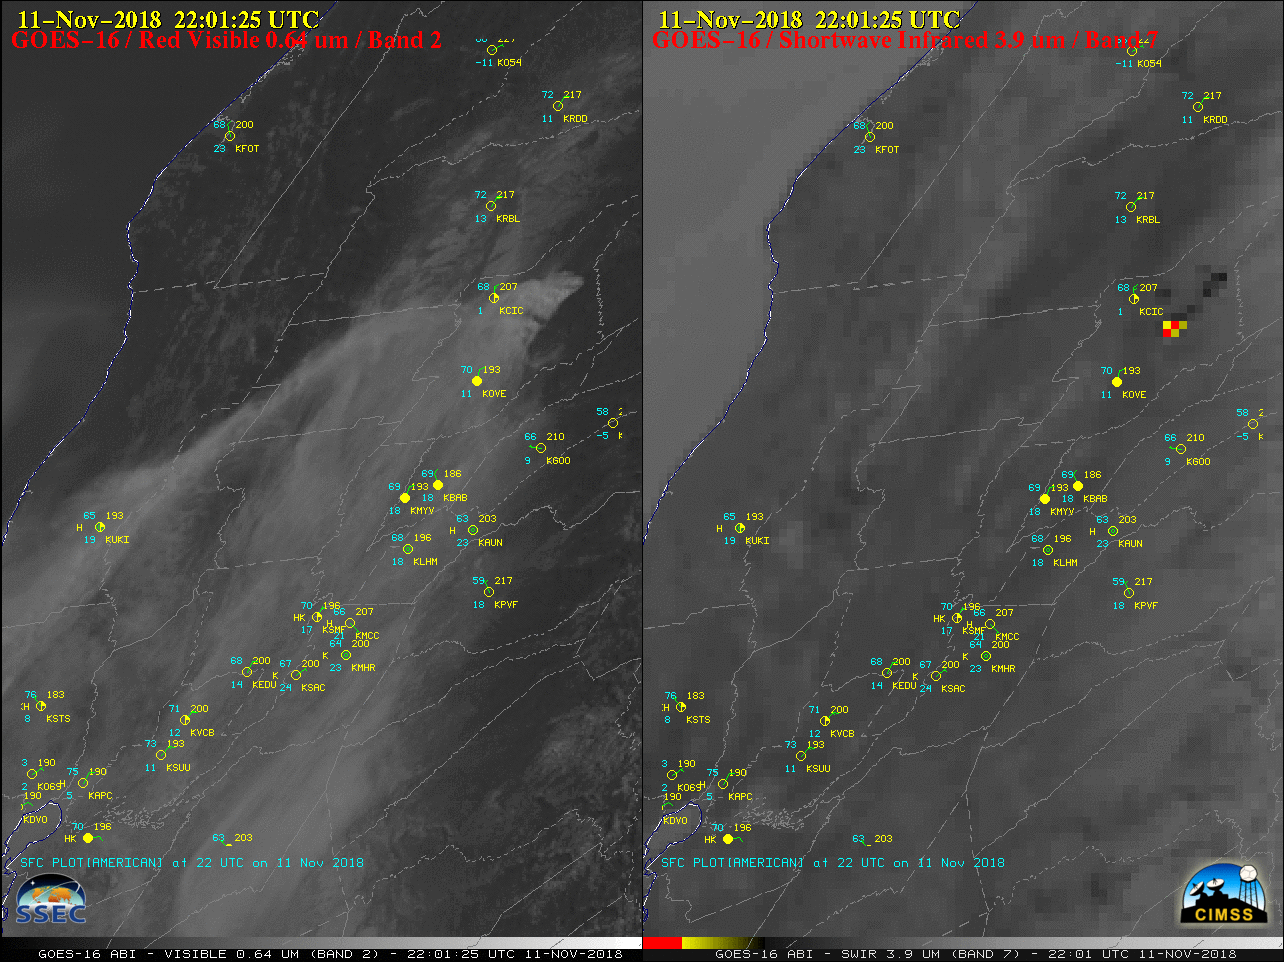 GOES-16 “Red” Visible (0.64 µm, left) and Shortwave Infrared (3.9 µm, right) images [click to play MP4 animation]